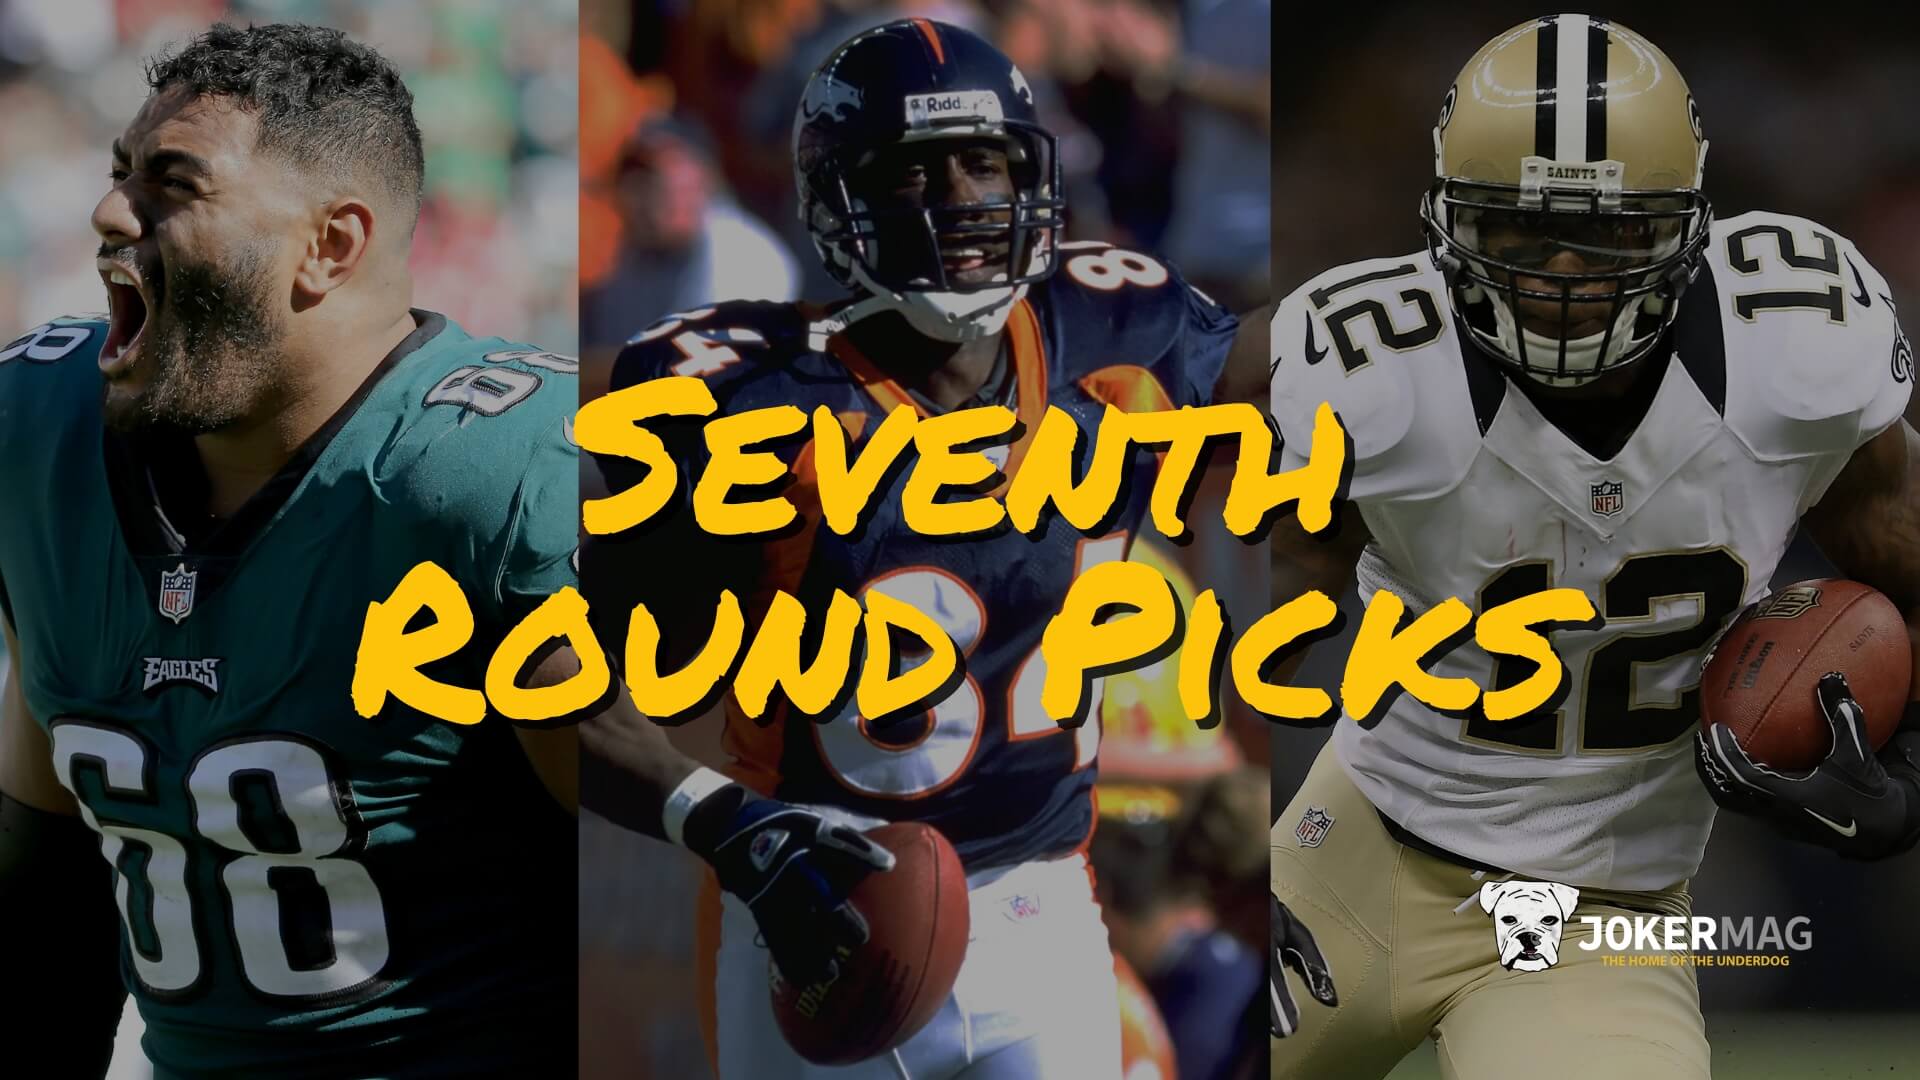 The best 7th round picks in NFL history, including Shannon Sharpe, Marques Colston, and Jordan Mailata